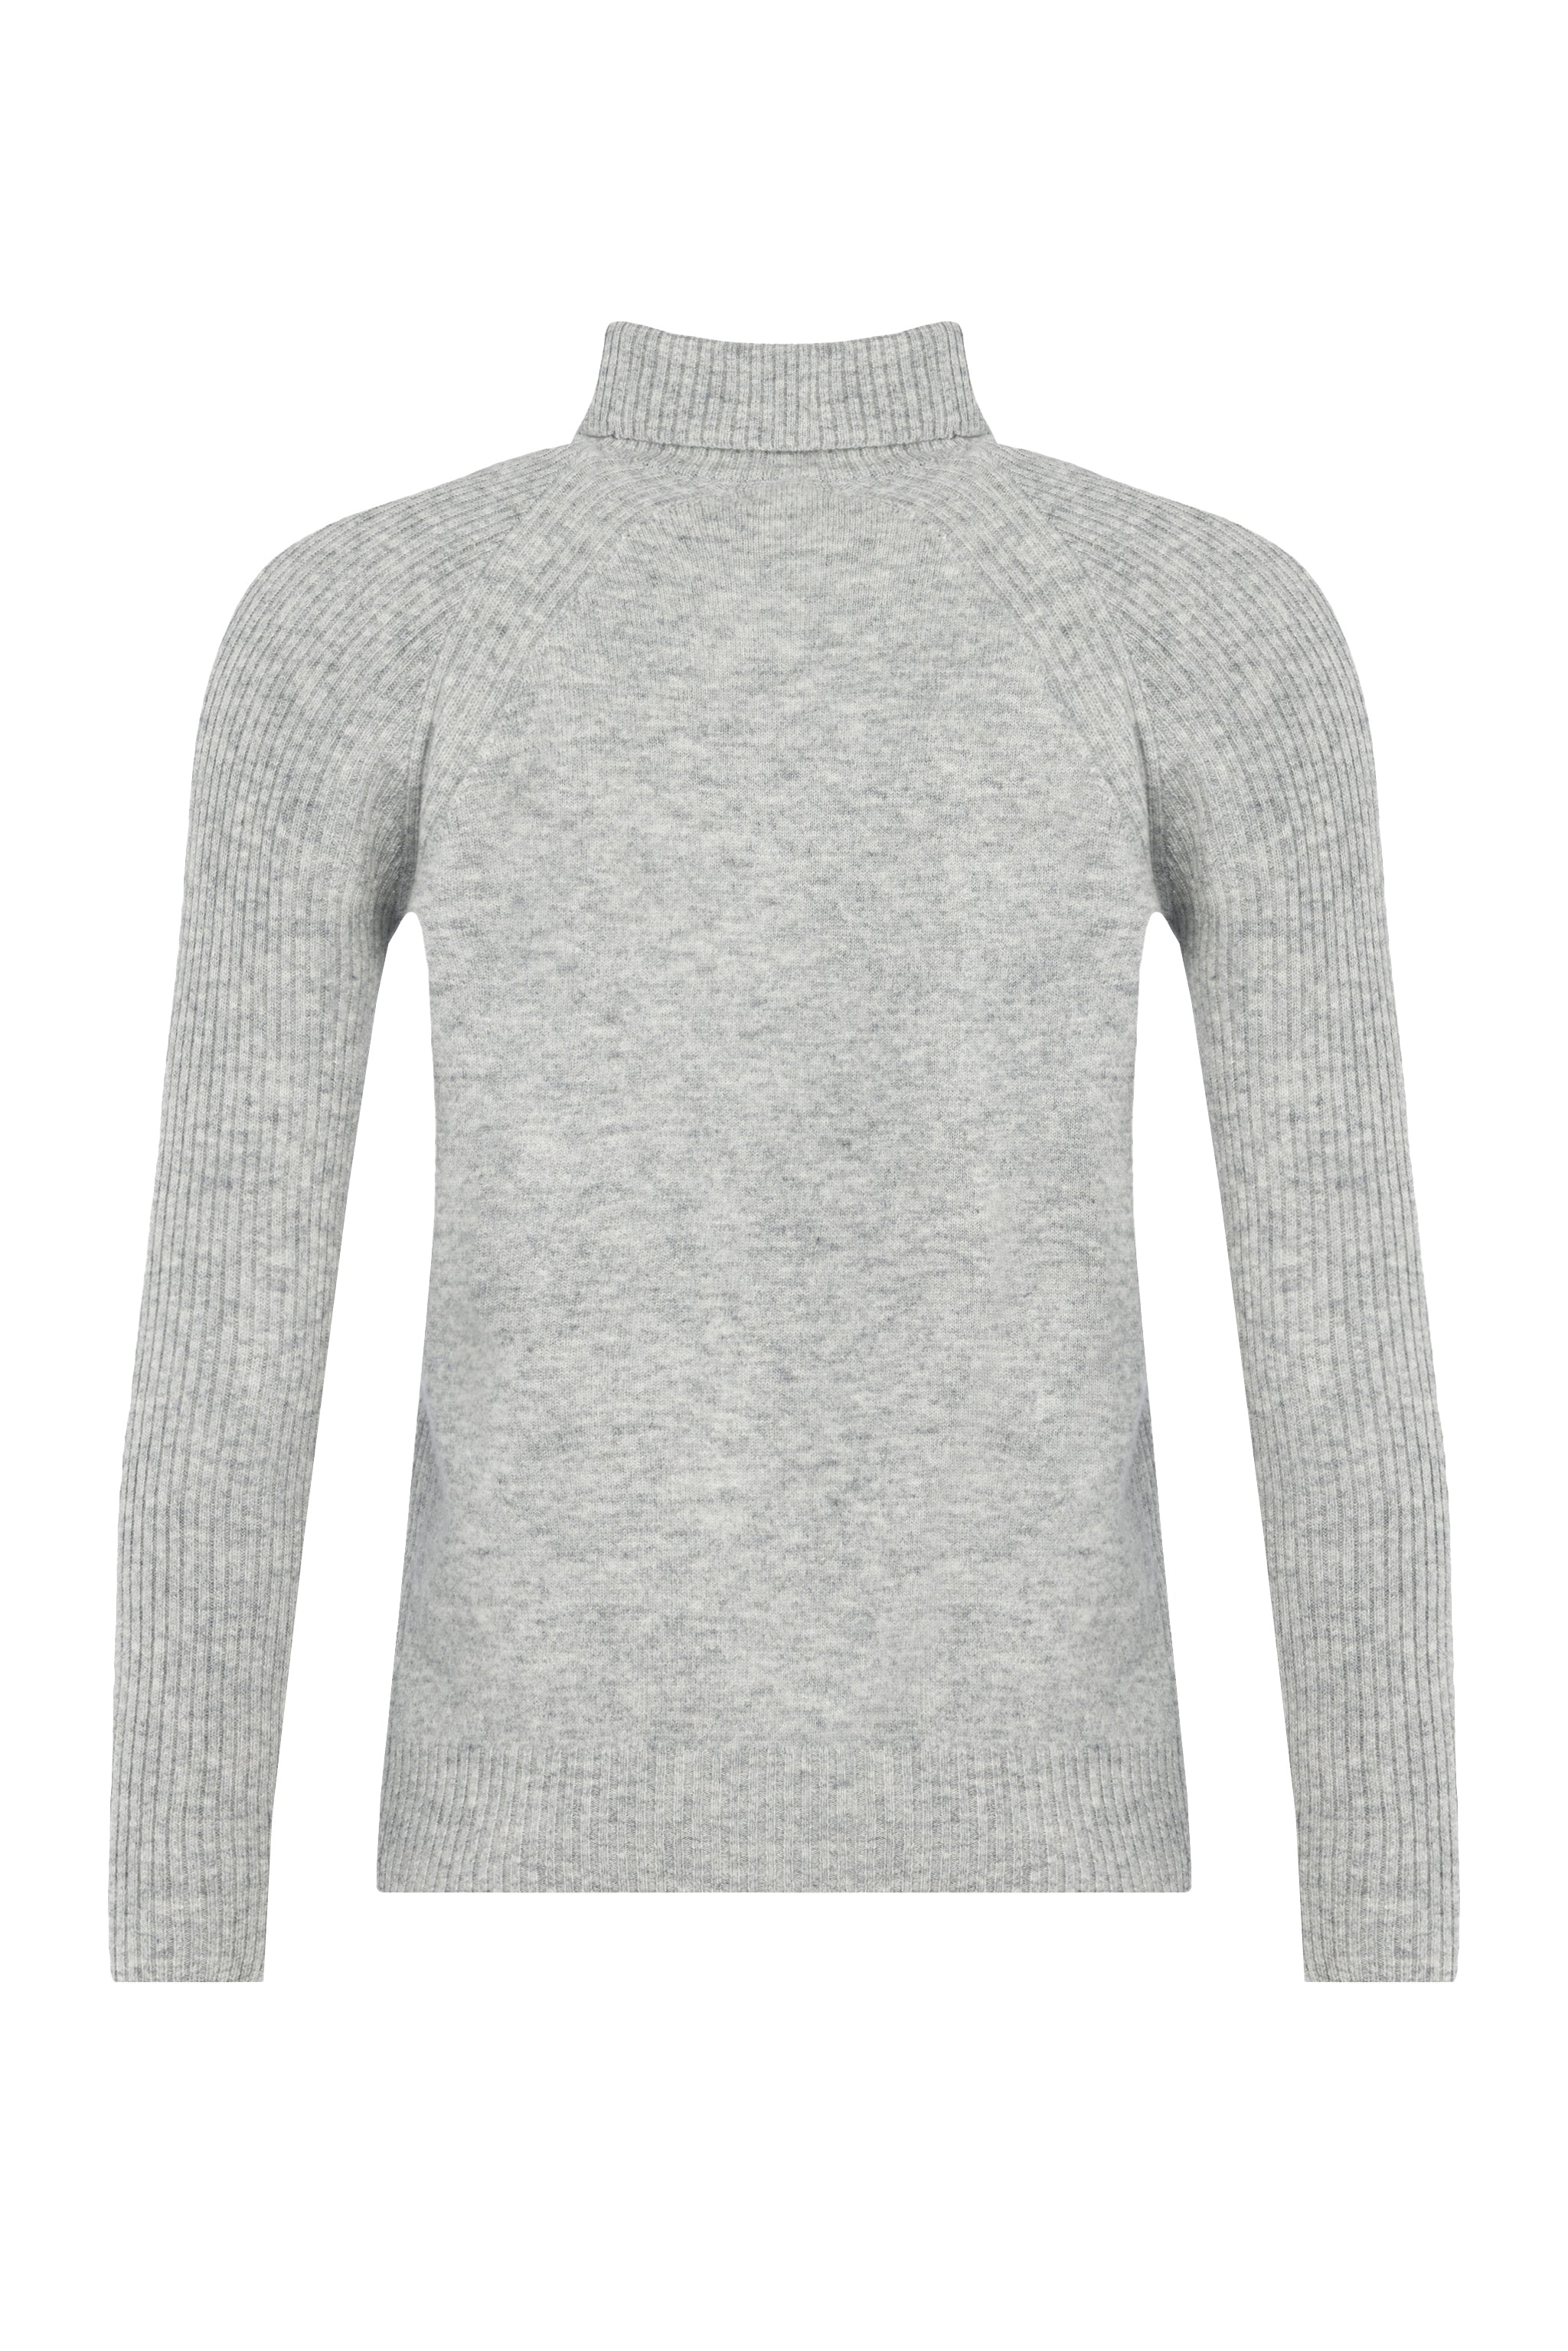 Ribbed Sleeve Roll Neck (Grey)